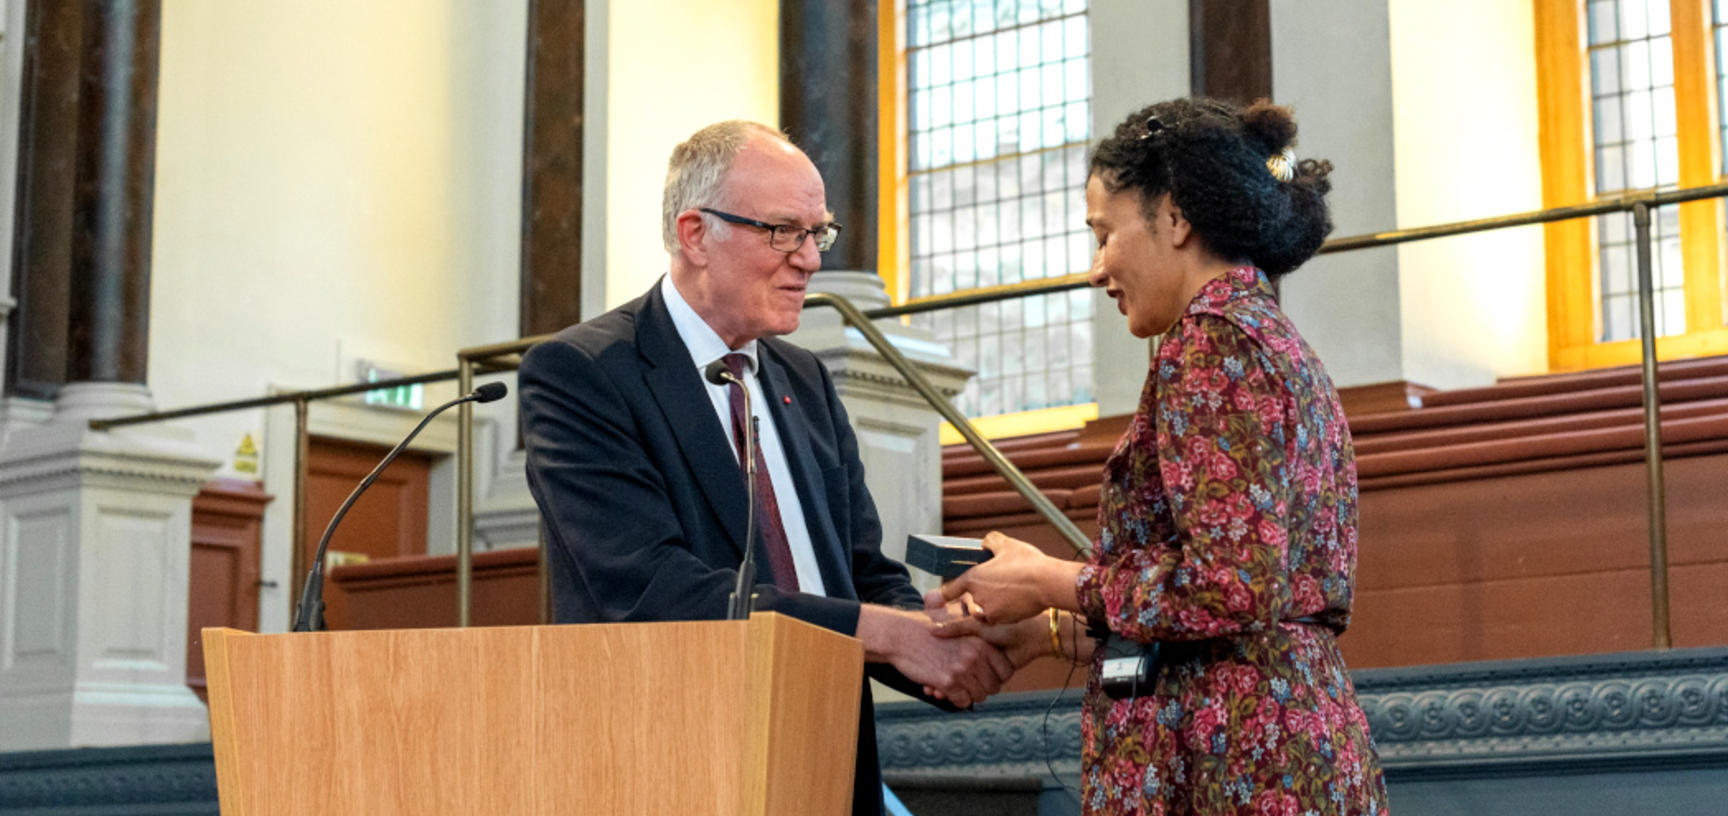 Richard Ovenden gives the Bodley Medal to Zadie Smith at a podium in the Sheldonian Theatre